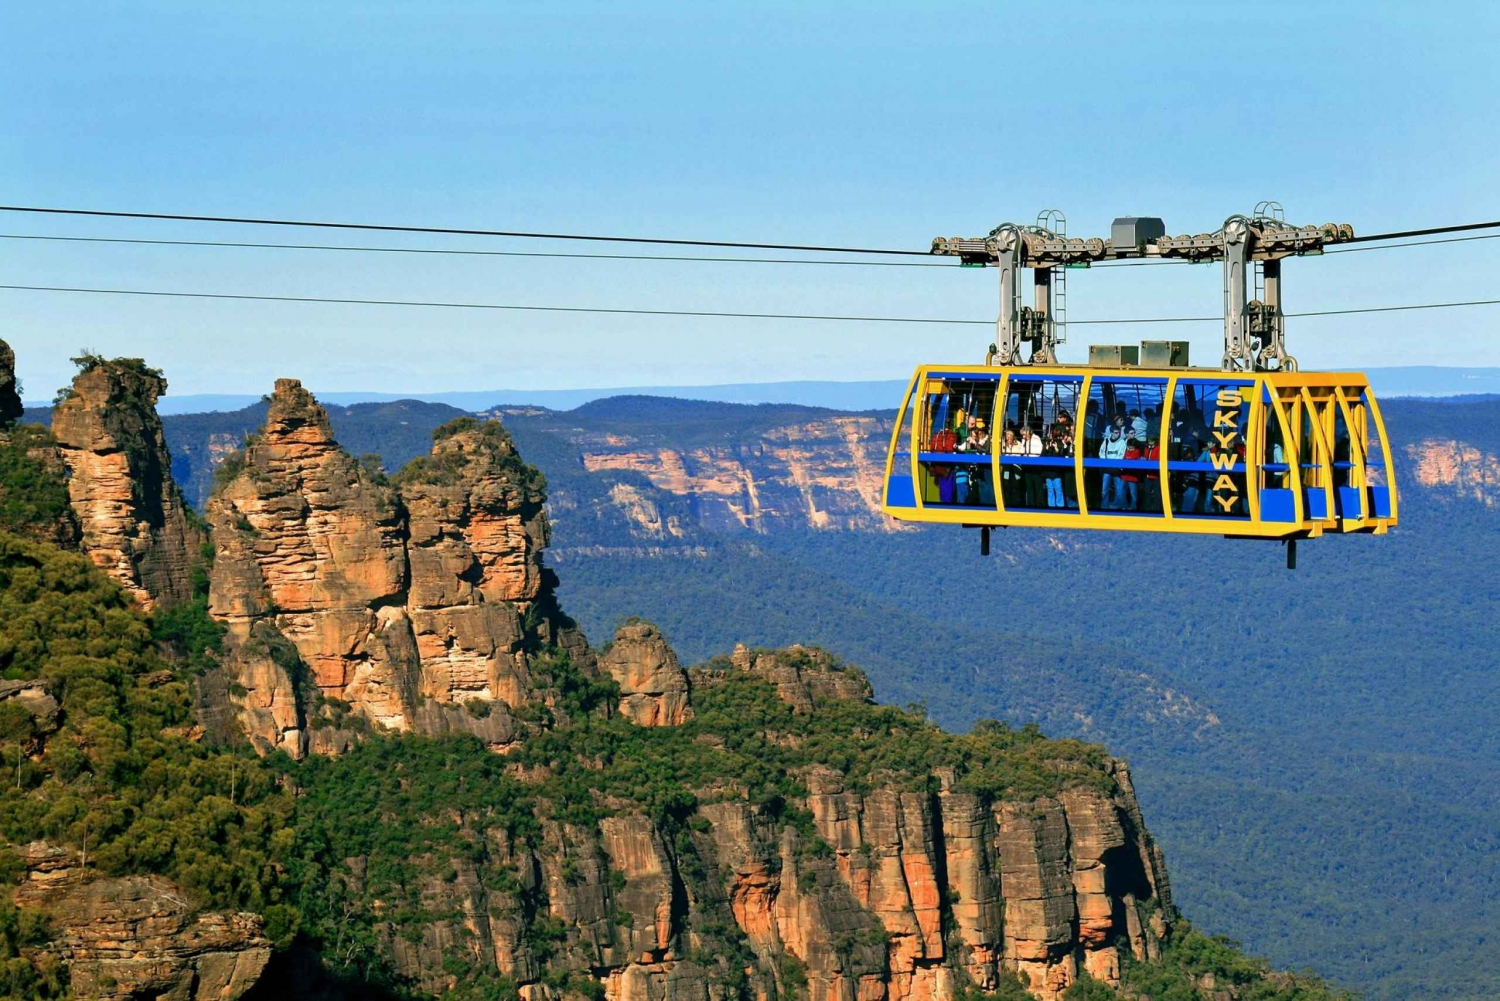 Sydney: Blue Mountains Scenic World, Wildlife Park and Lunch